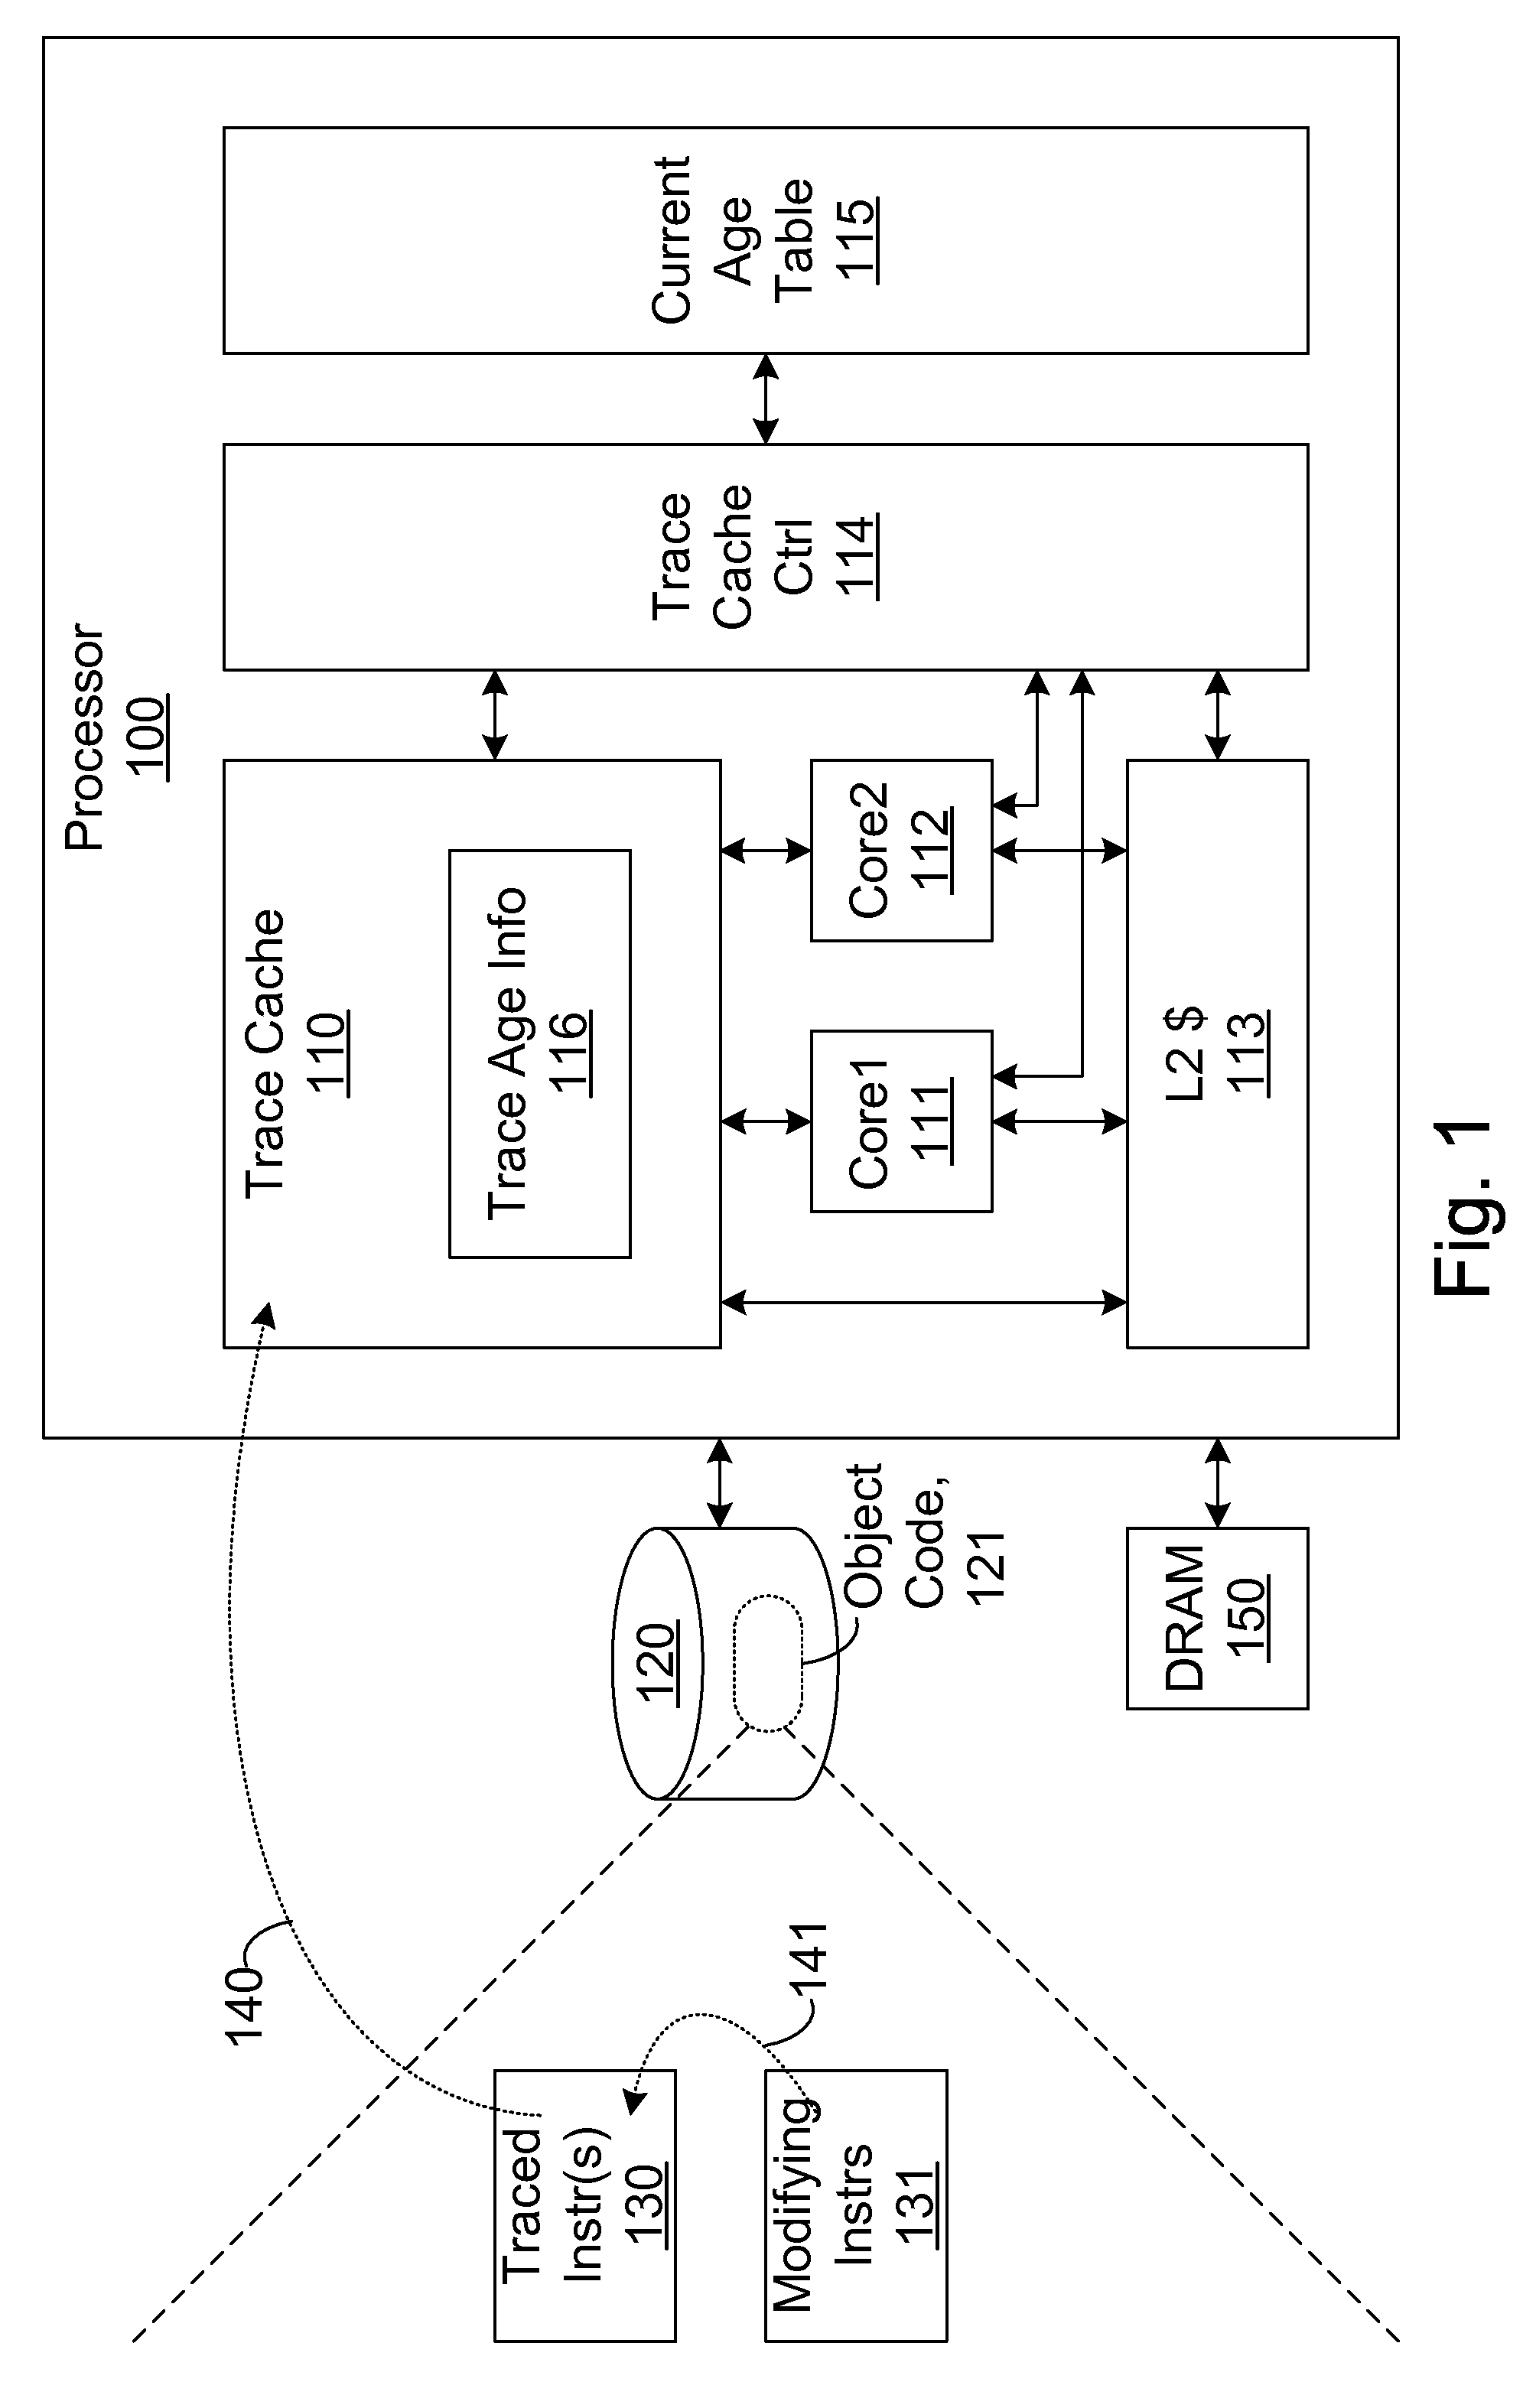 Efficient trace cache management during self-modifying code processing